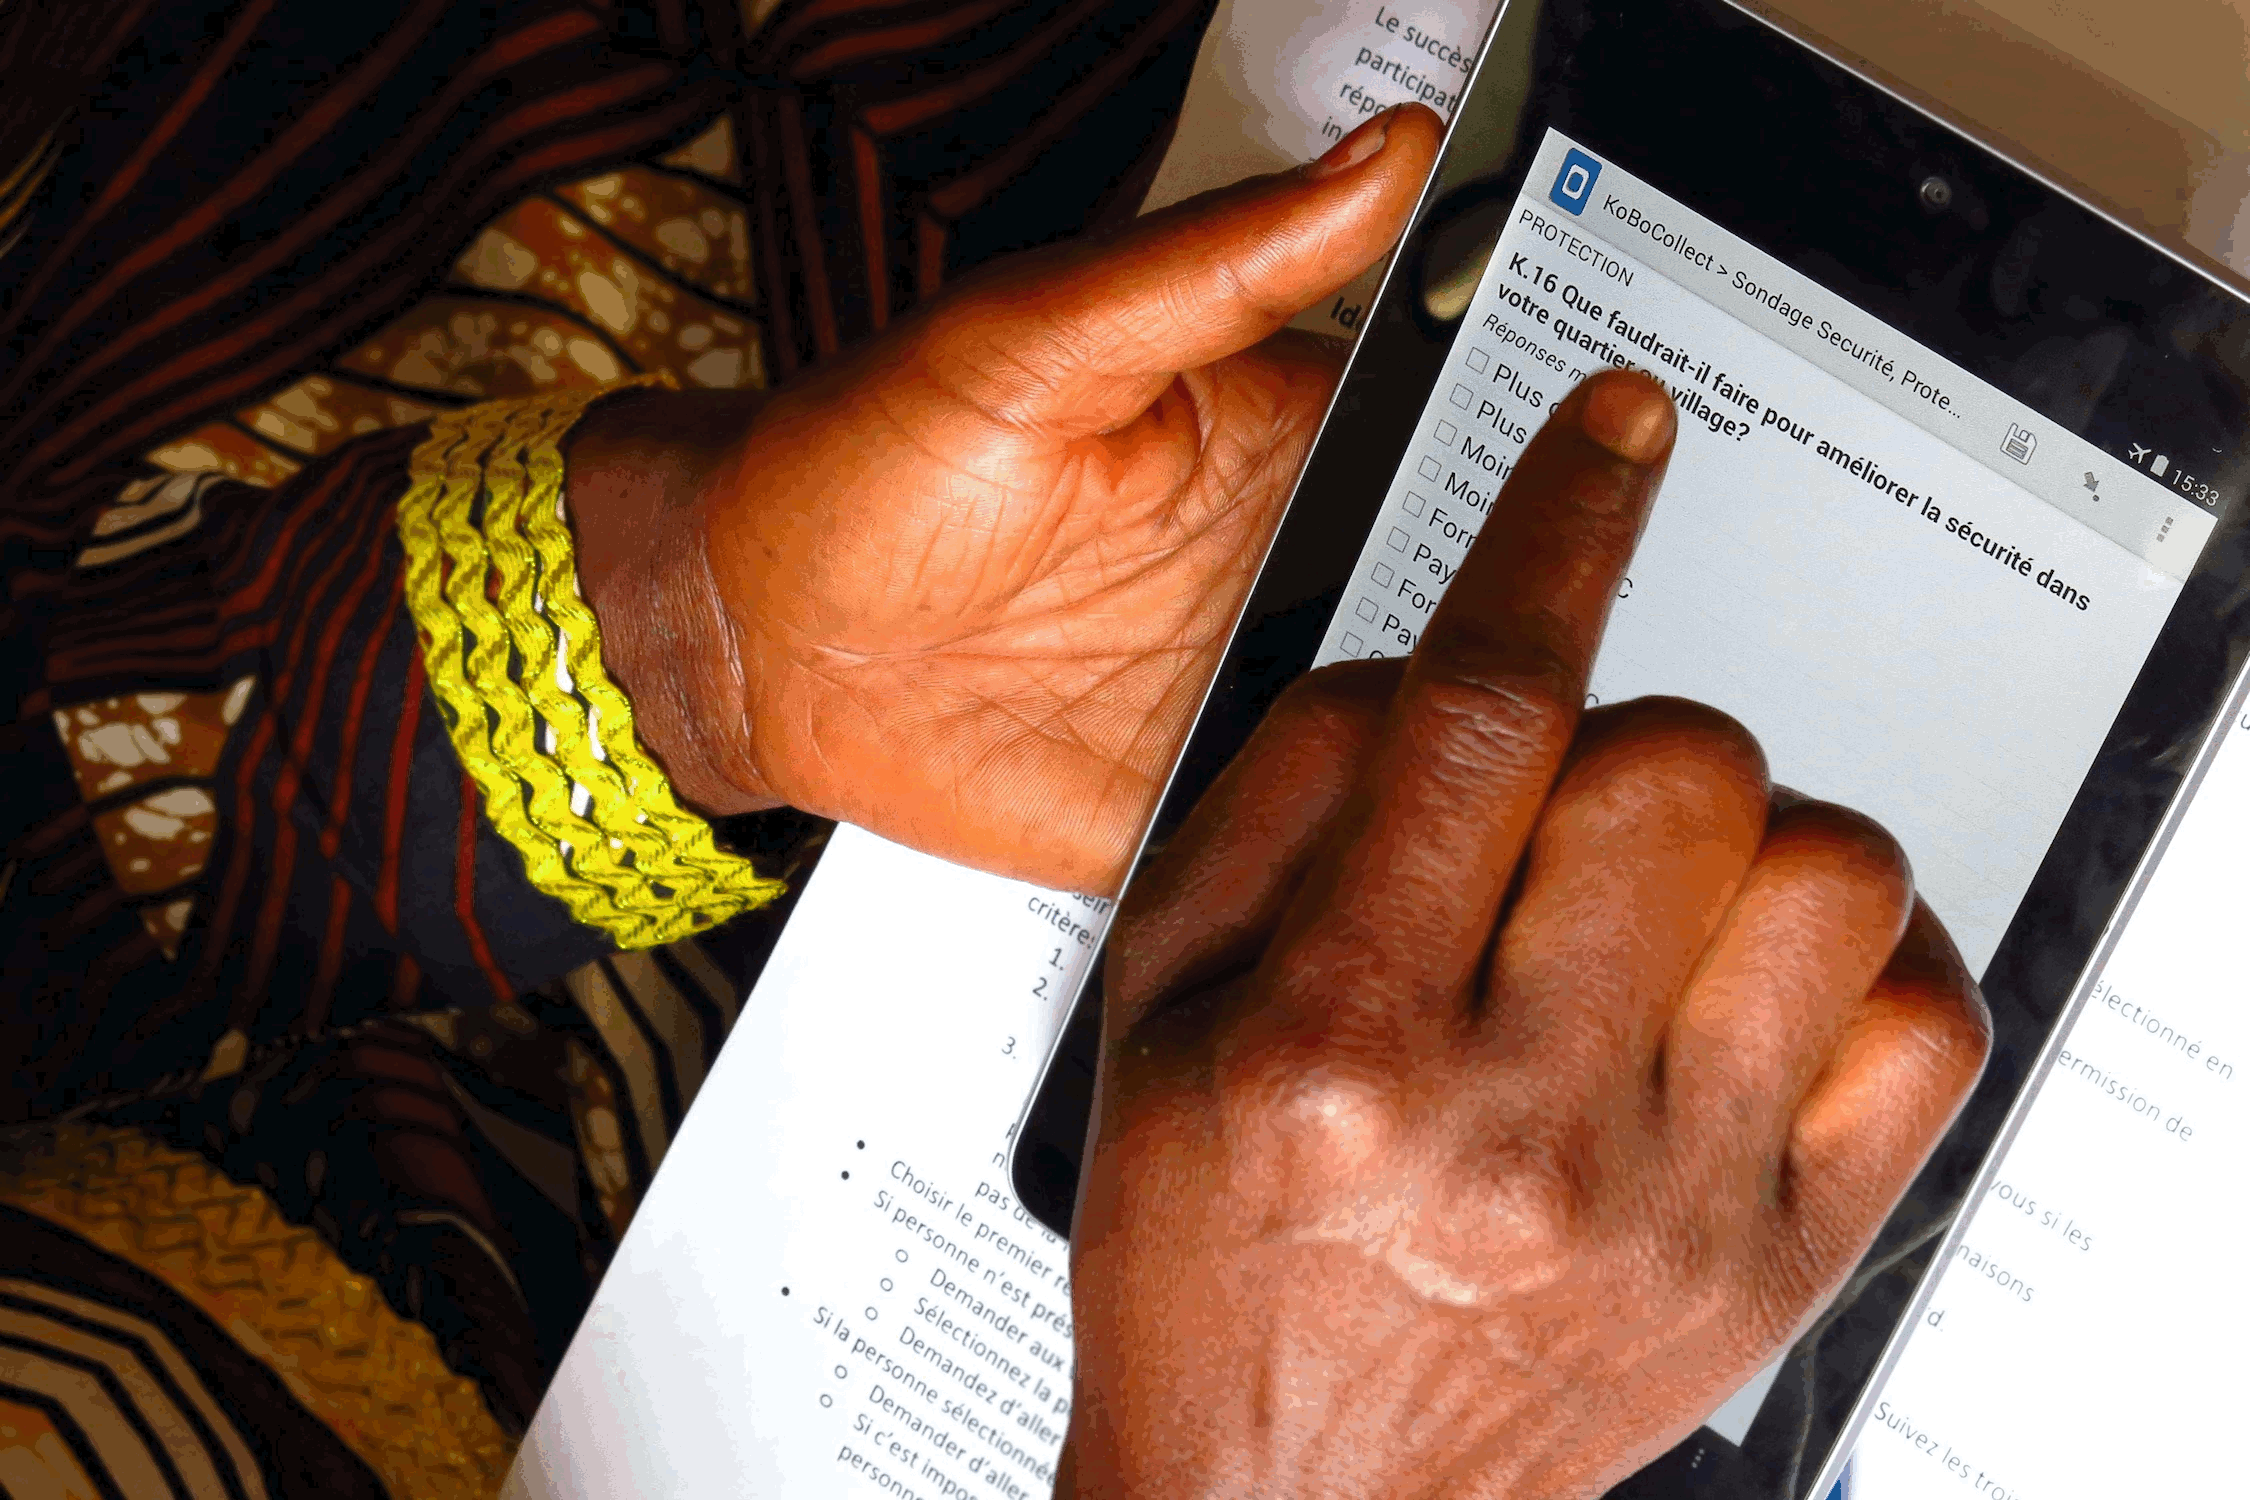 A women filling a form on a mobile device.